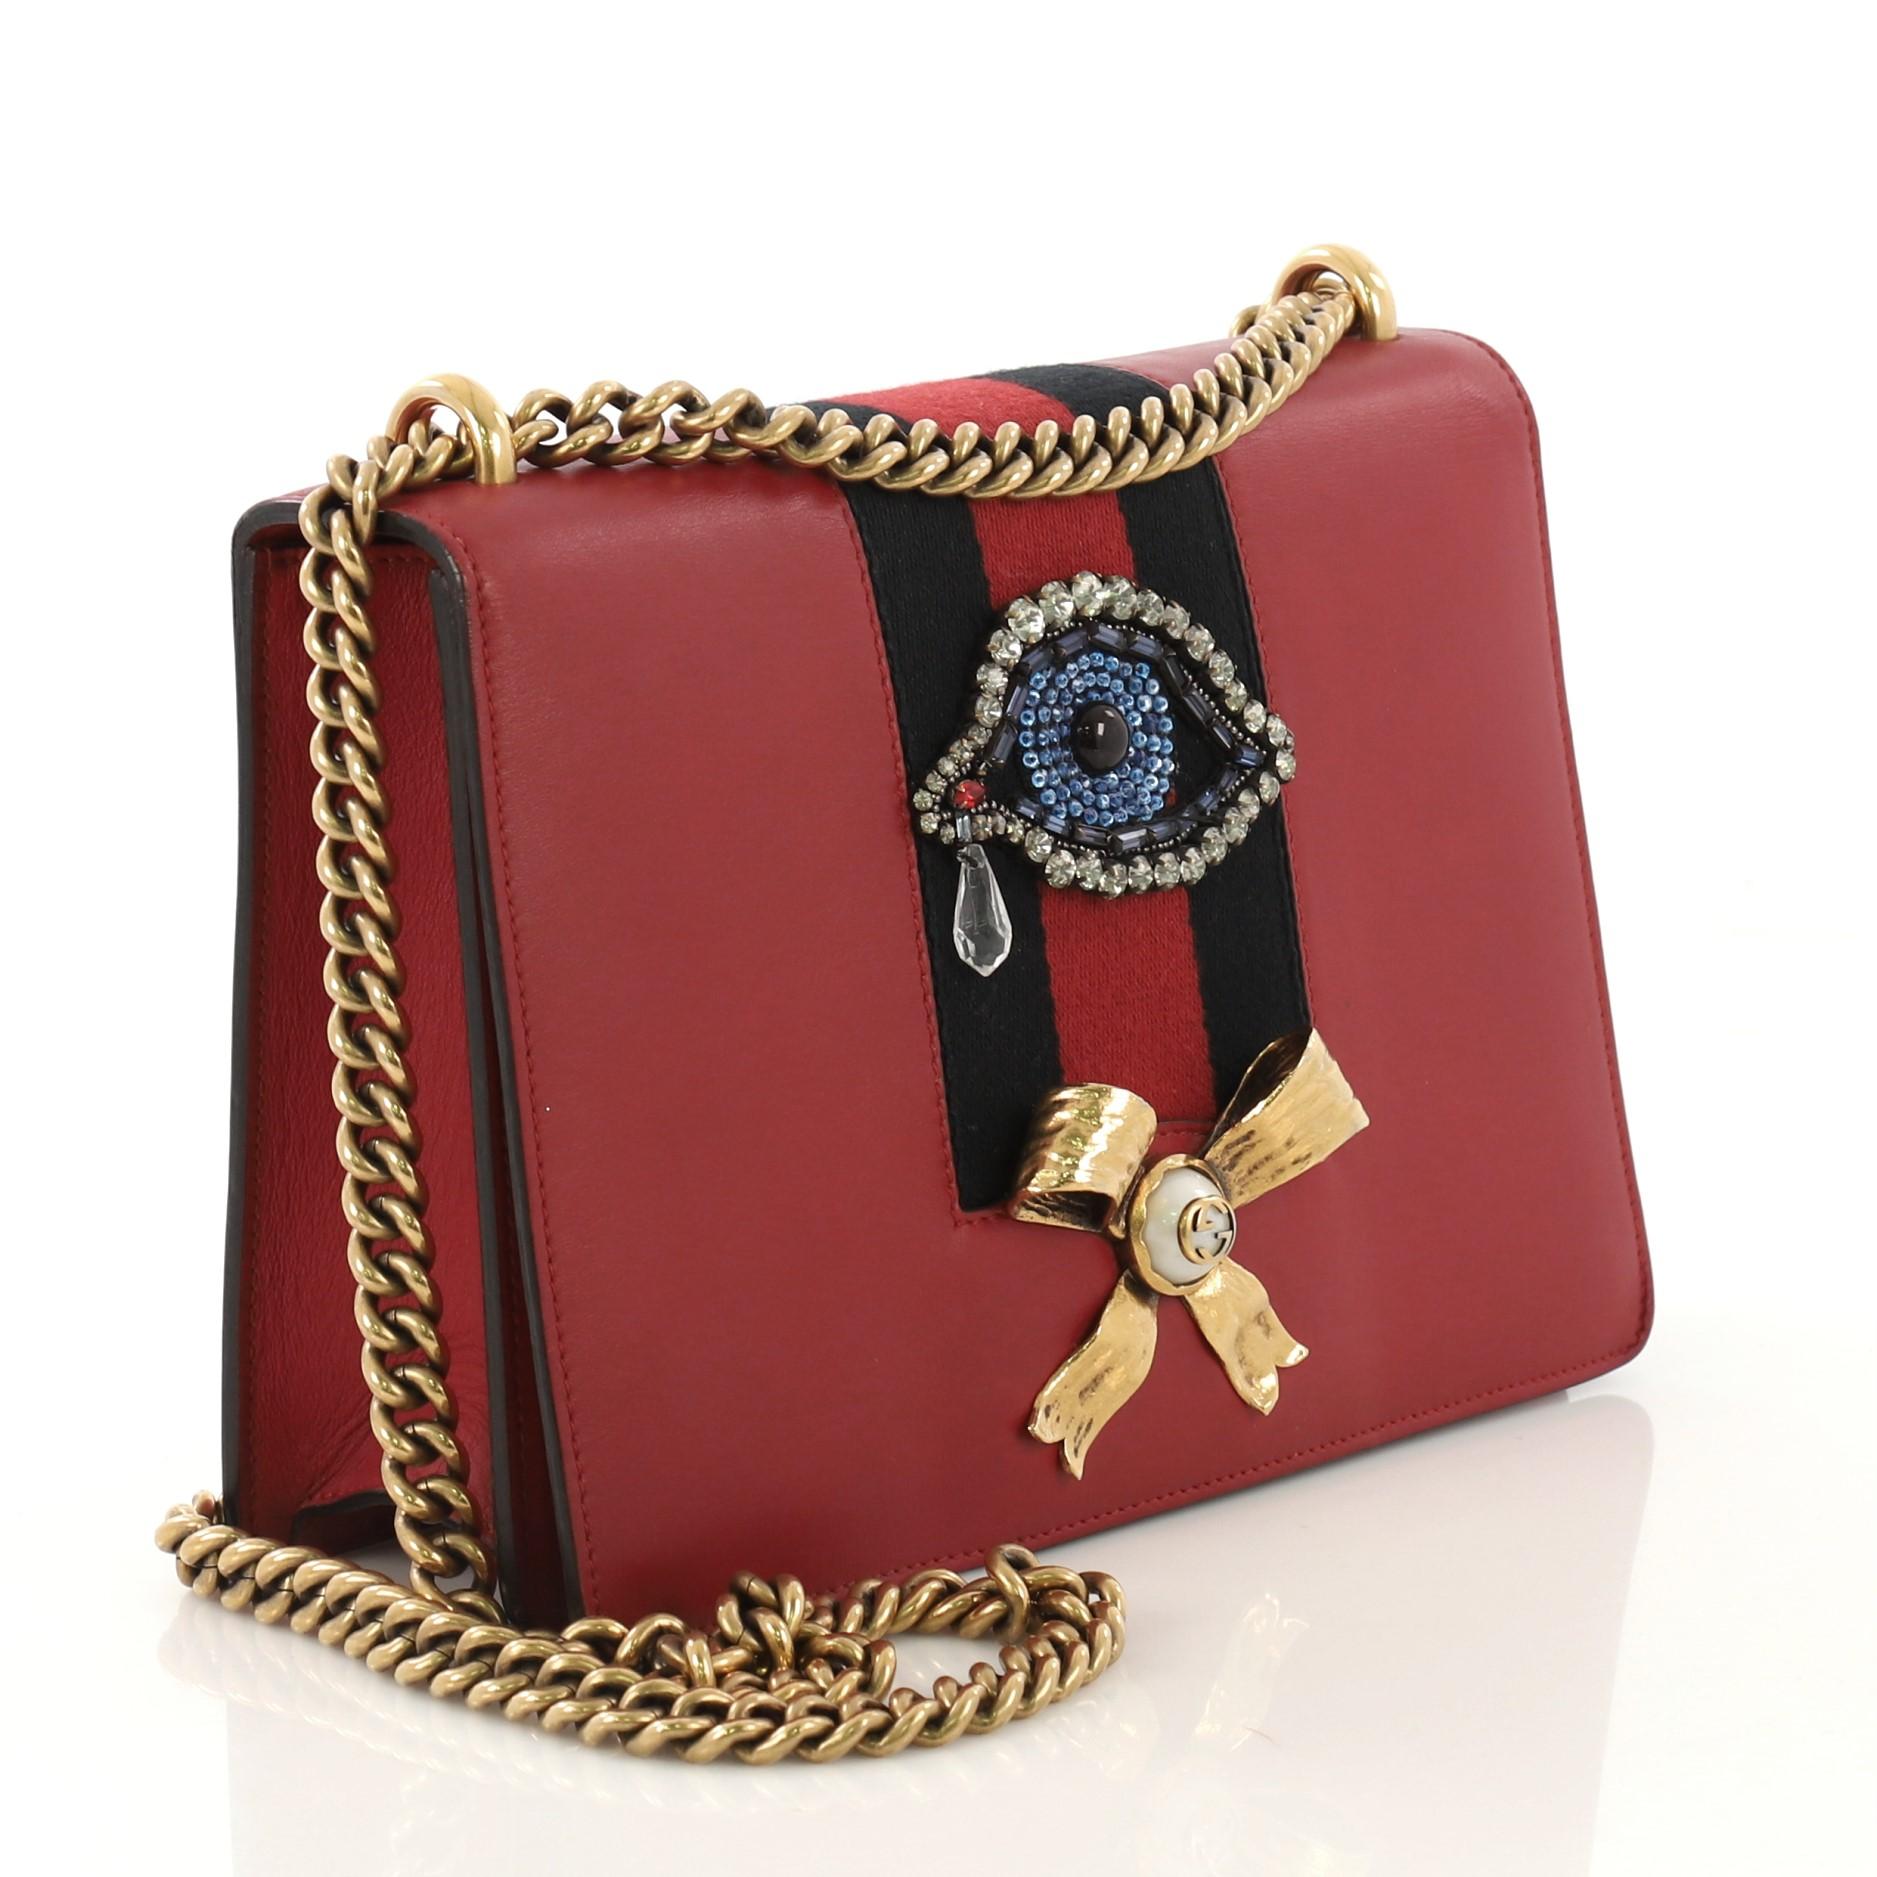 This Gucci Web Peony Chain Shoulder Bag Embellished Leather Medium, crafted in red embellished leather with beaded eye appliqu̩e and golden metal bow with faux pearl, features chain-link shoulder strap, black and red wed stripe and aged gold-tone